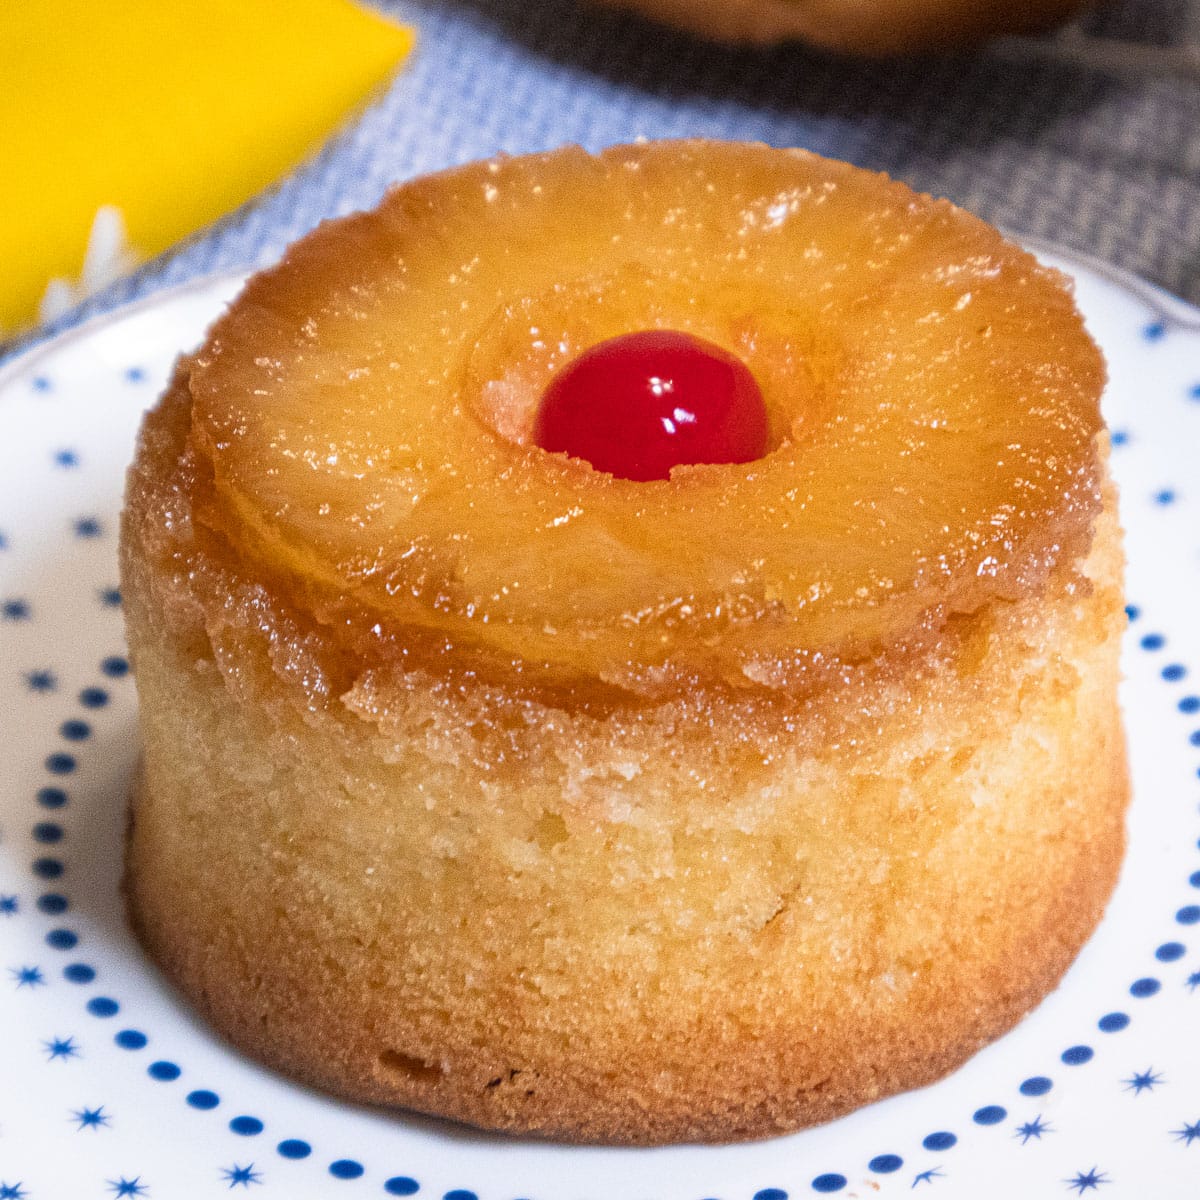 This Mini Pineapple Upside Down Cake features a pineapple slice with a cherry in the middle on top of a yellow cake sitting on a blue and white plate.